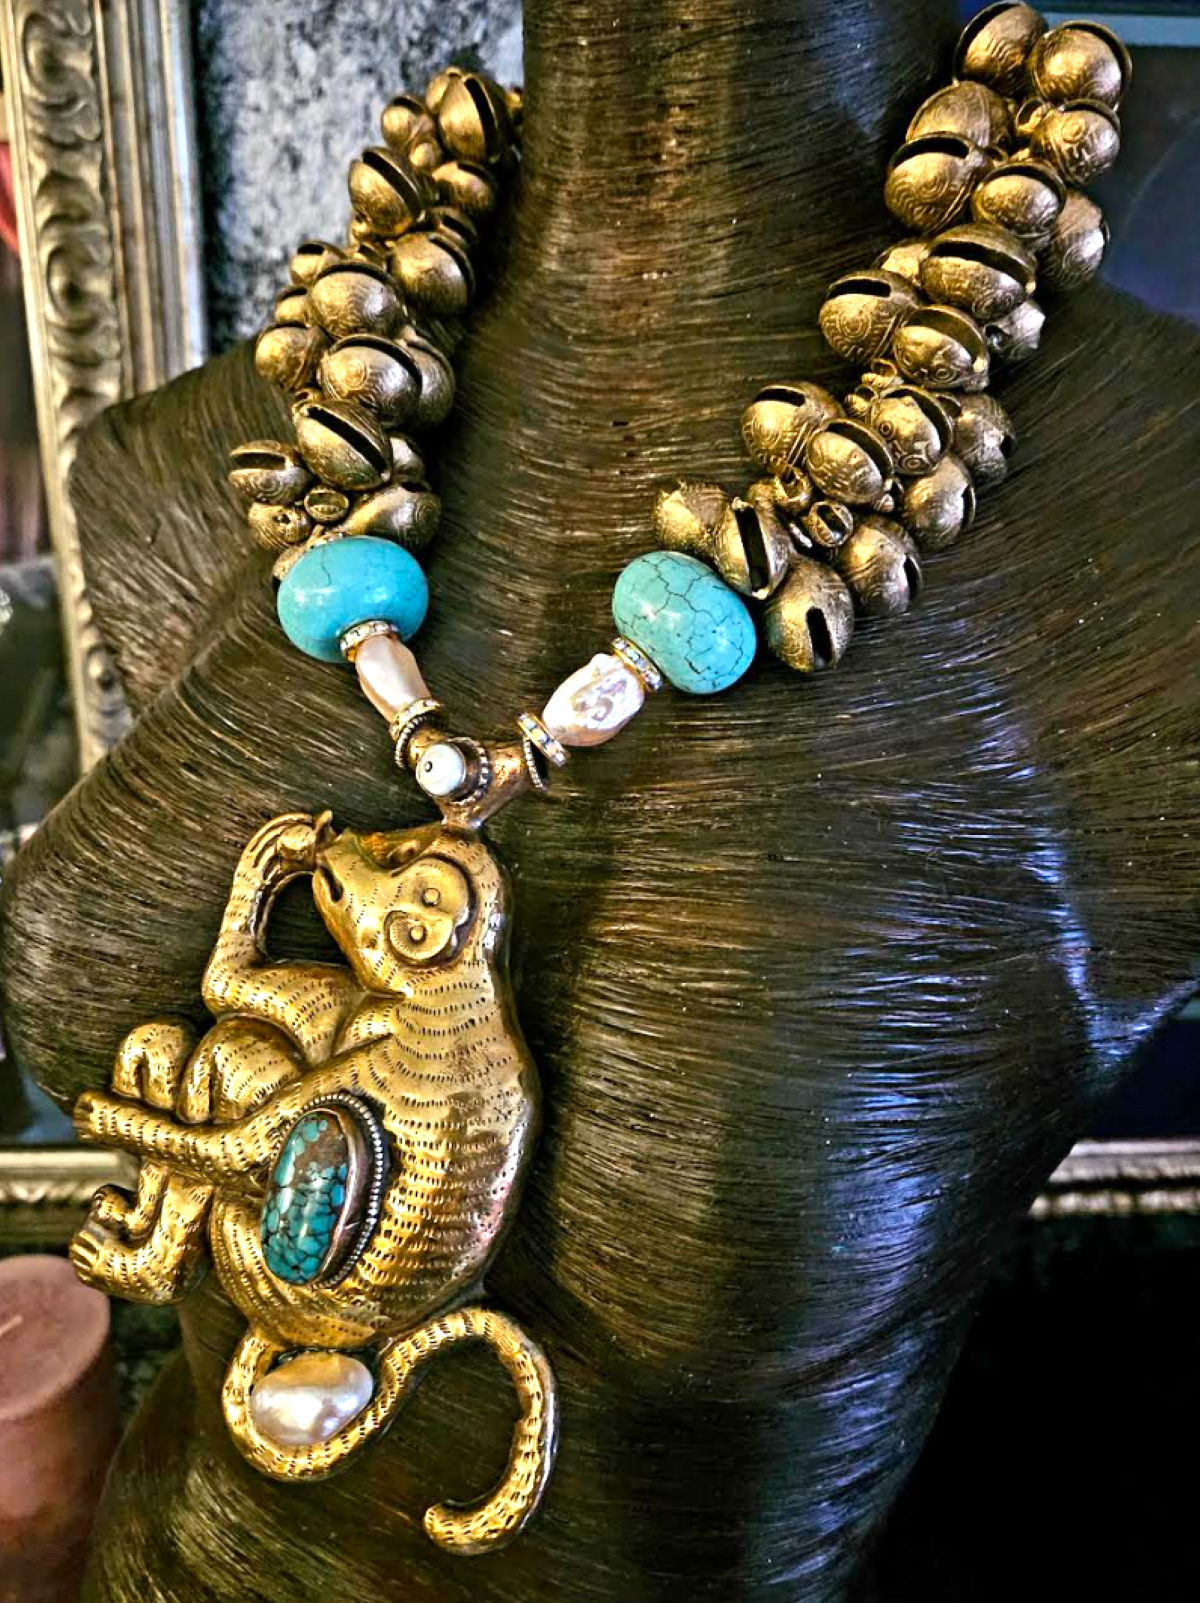 Asian Brass Chime Statement Necklace - Rare Brass Repousse Monkey Pendant Chest Piece -  Heavy Haute Couture Neck Candy - Kat Kouture Jewelry